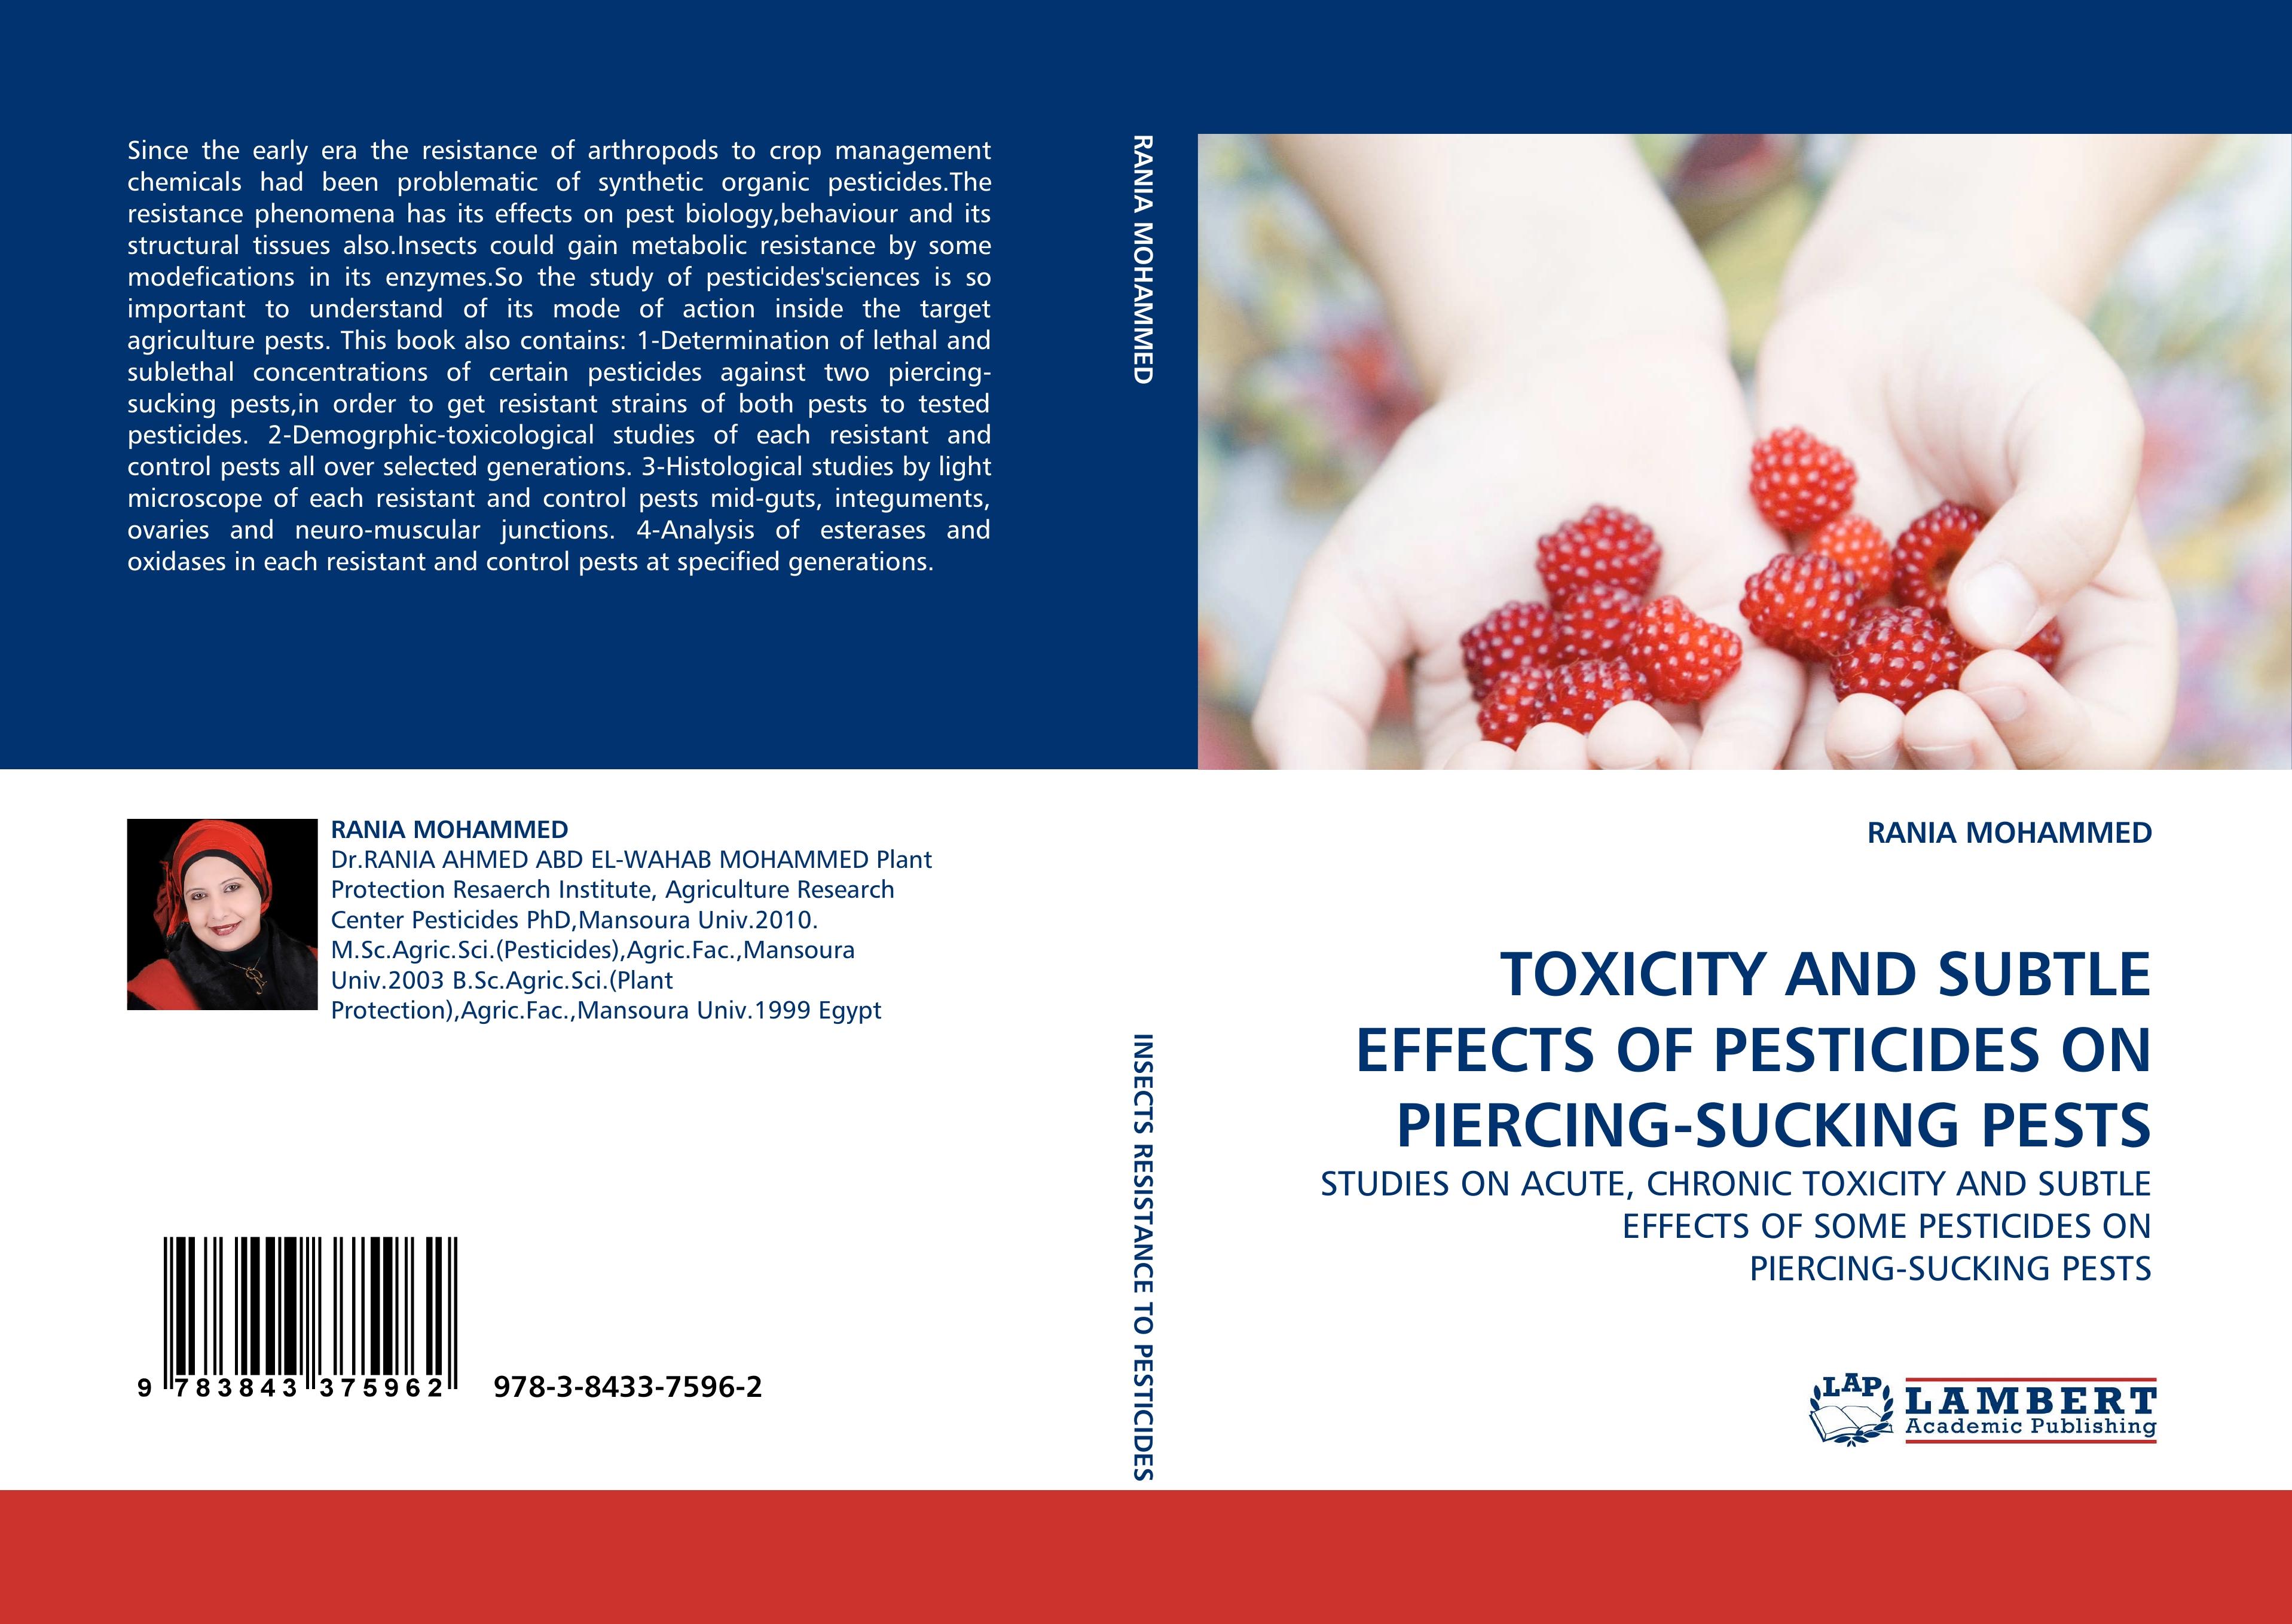 TOXICITY AND SUBTLE EFFECTS OF PESTICIDES ON PIERCING-SUCKING PESTS - Mohammed, Rania